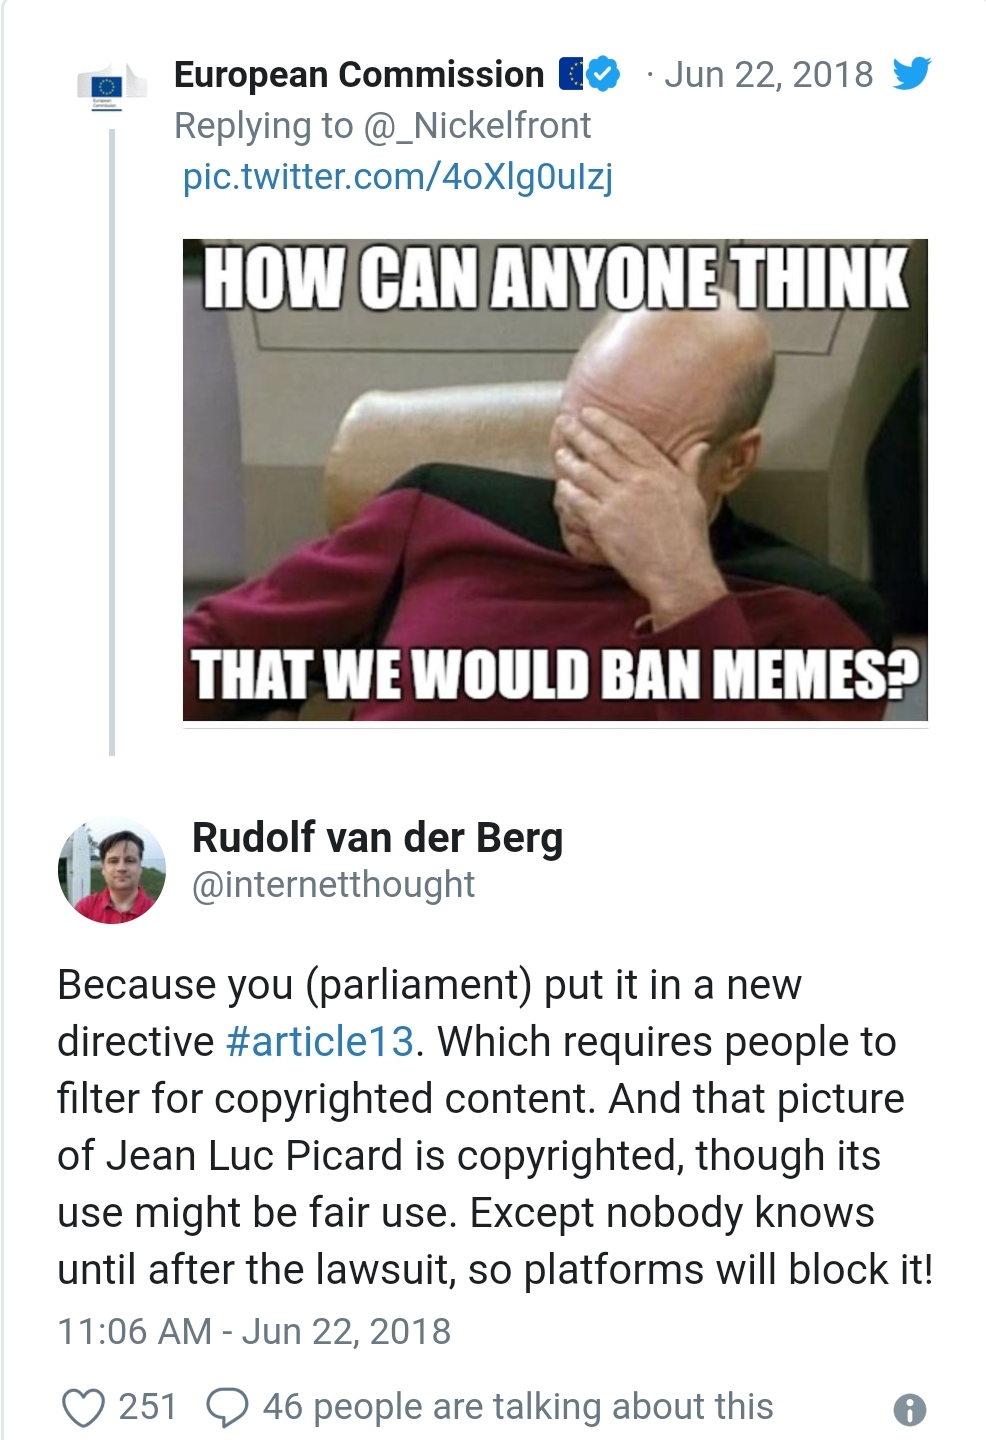 cringe picard facepalm - y European Commission & pic.twitter.com4oXlgoulz How Can Anyone Think That We Would Ban Memes? Rudolf van der Berg Because you parliament put it in a new directive . Which requires people to filter for copyrighted content. And tha